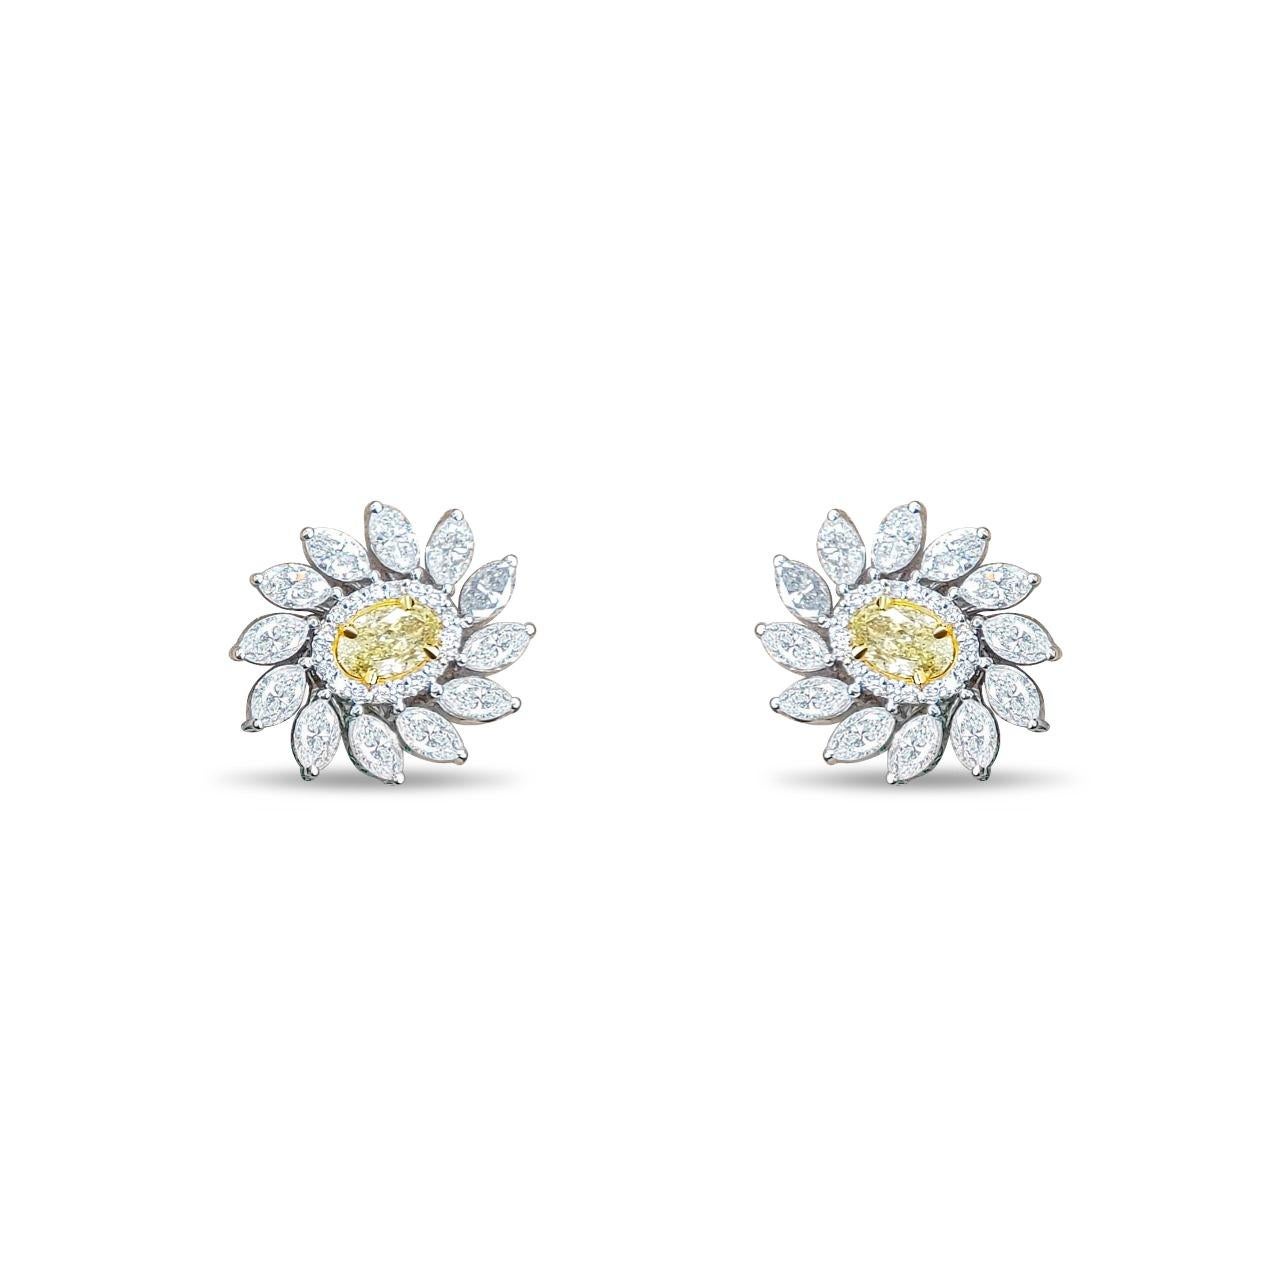 Elevate your style with these captivating earrings, a testament to refined taste on those memorable nights where every detail matters

Earring Information
Natural Diamond
Metal : 14K Gold
Color : White Gold
Total Carat Weight : 4.72 ttcw
Gold Weight